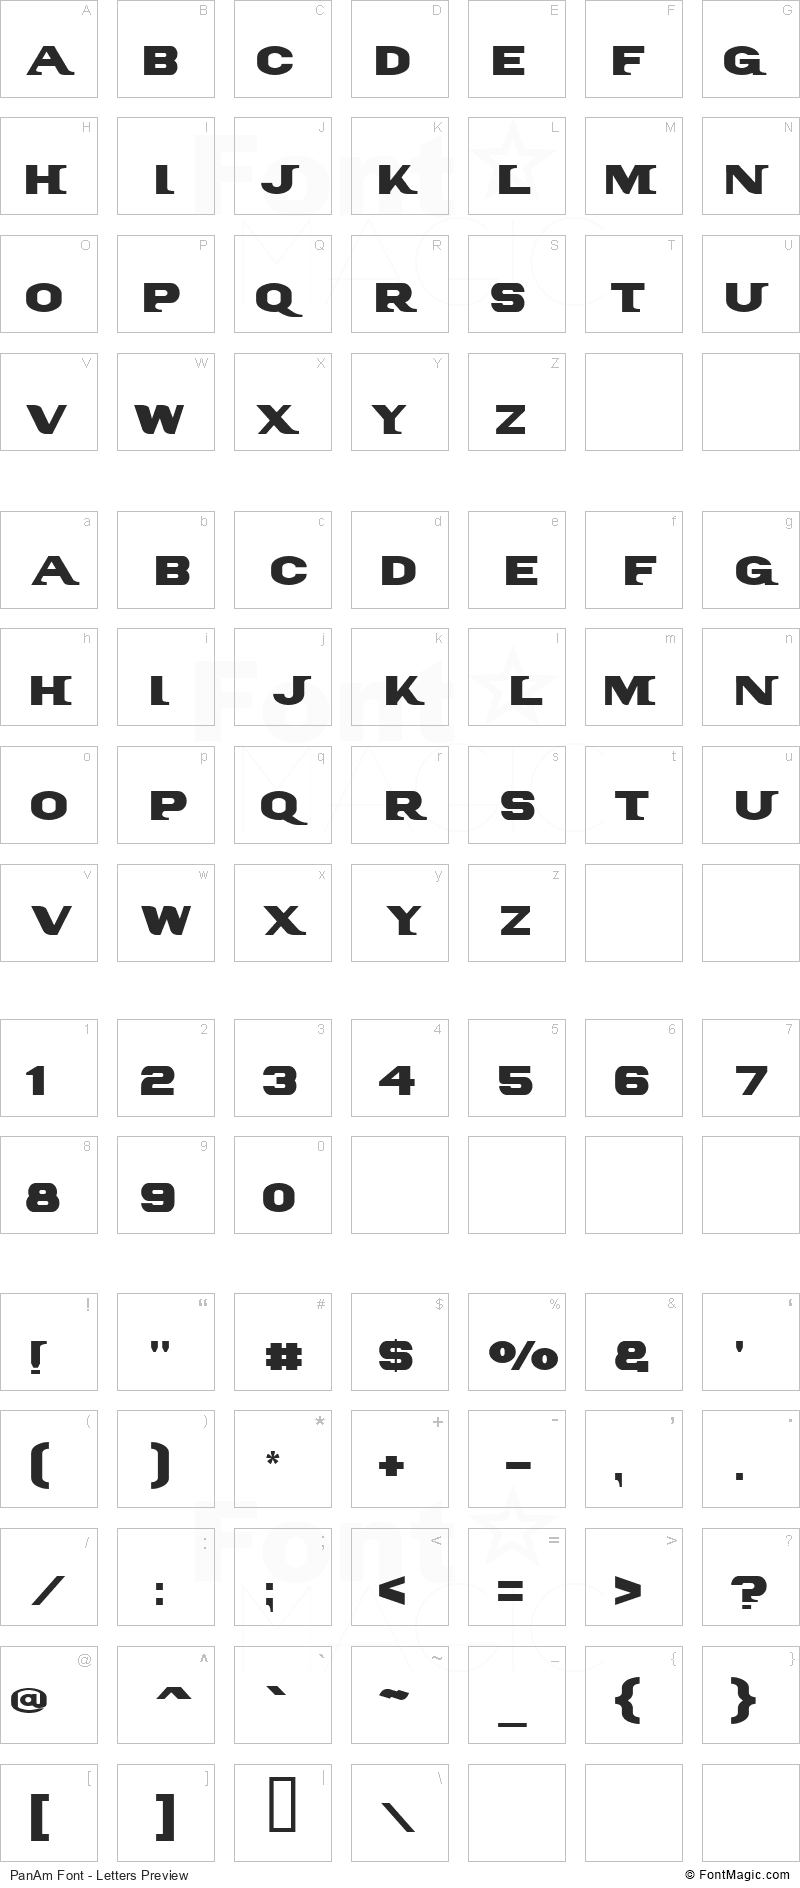 PanAm Font - All Latters Preview Chart